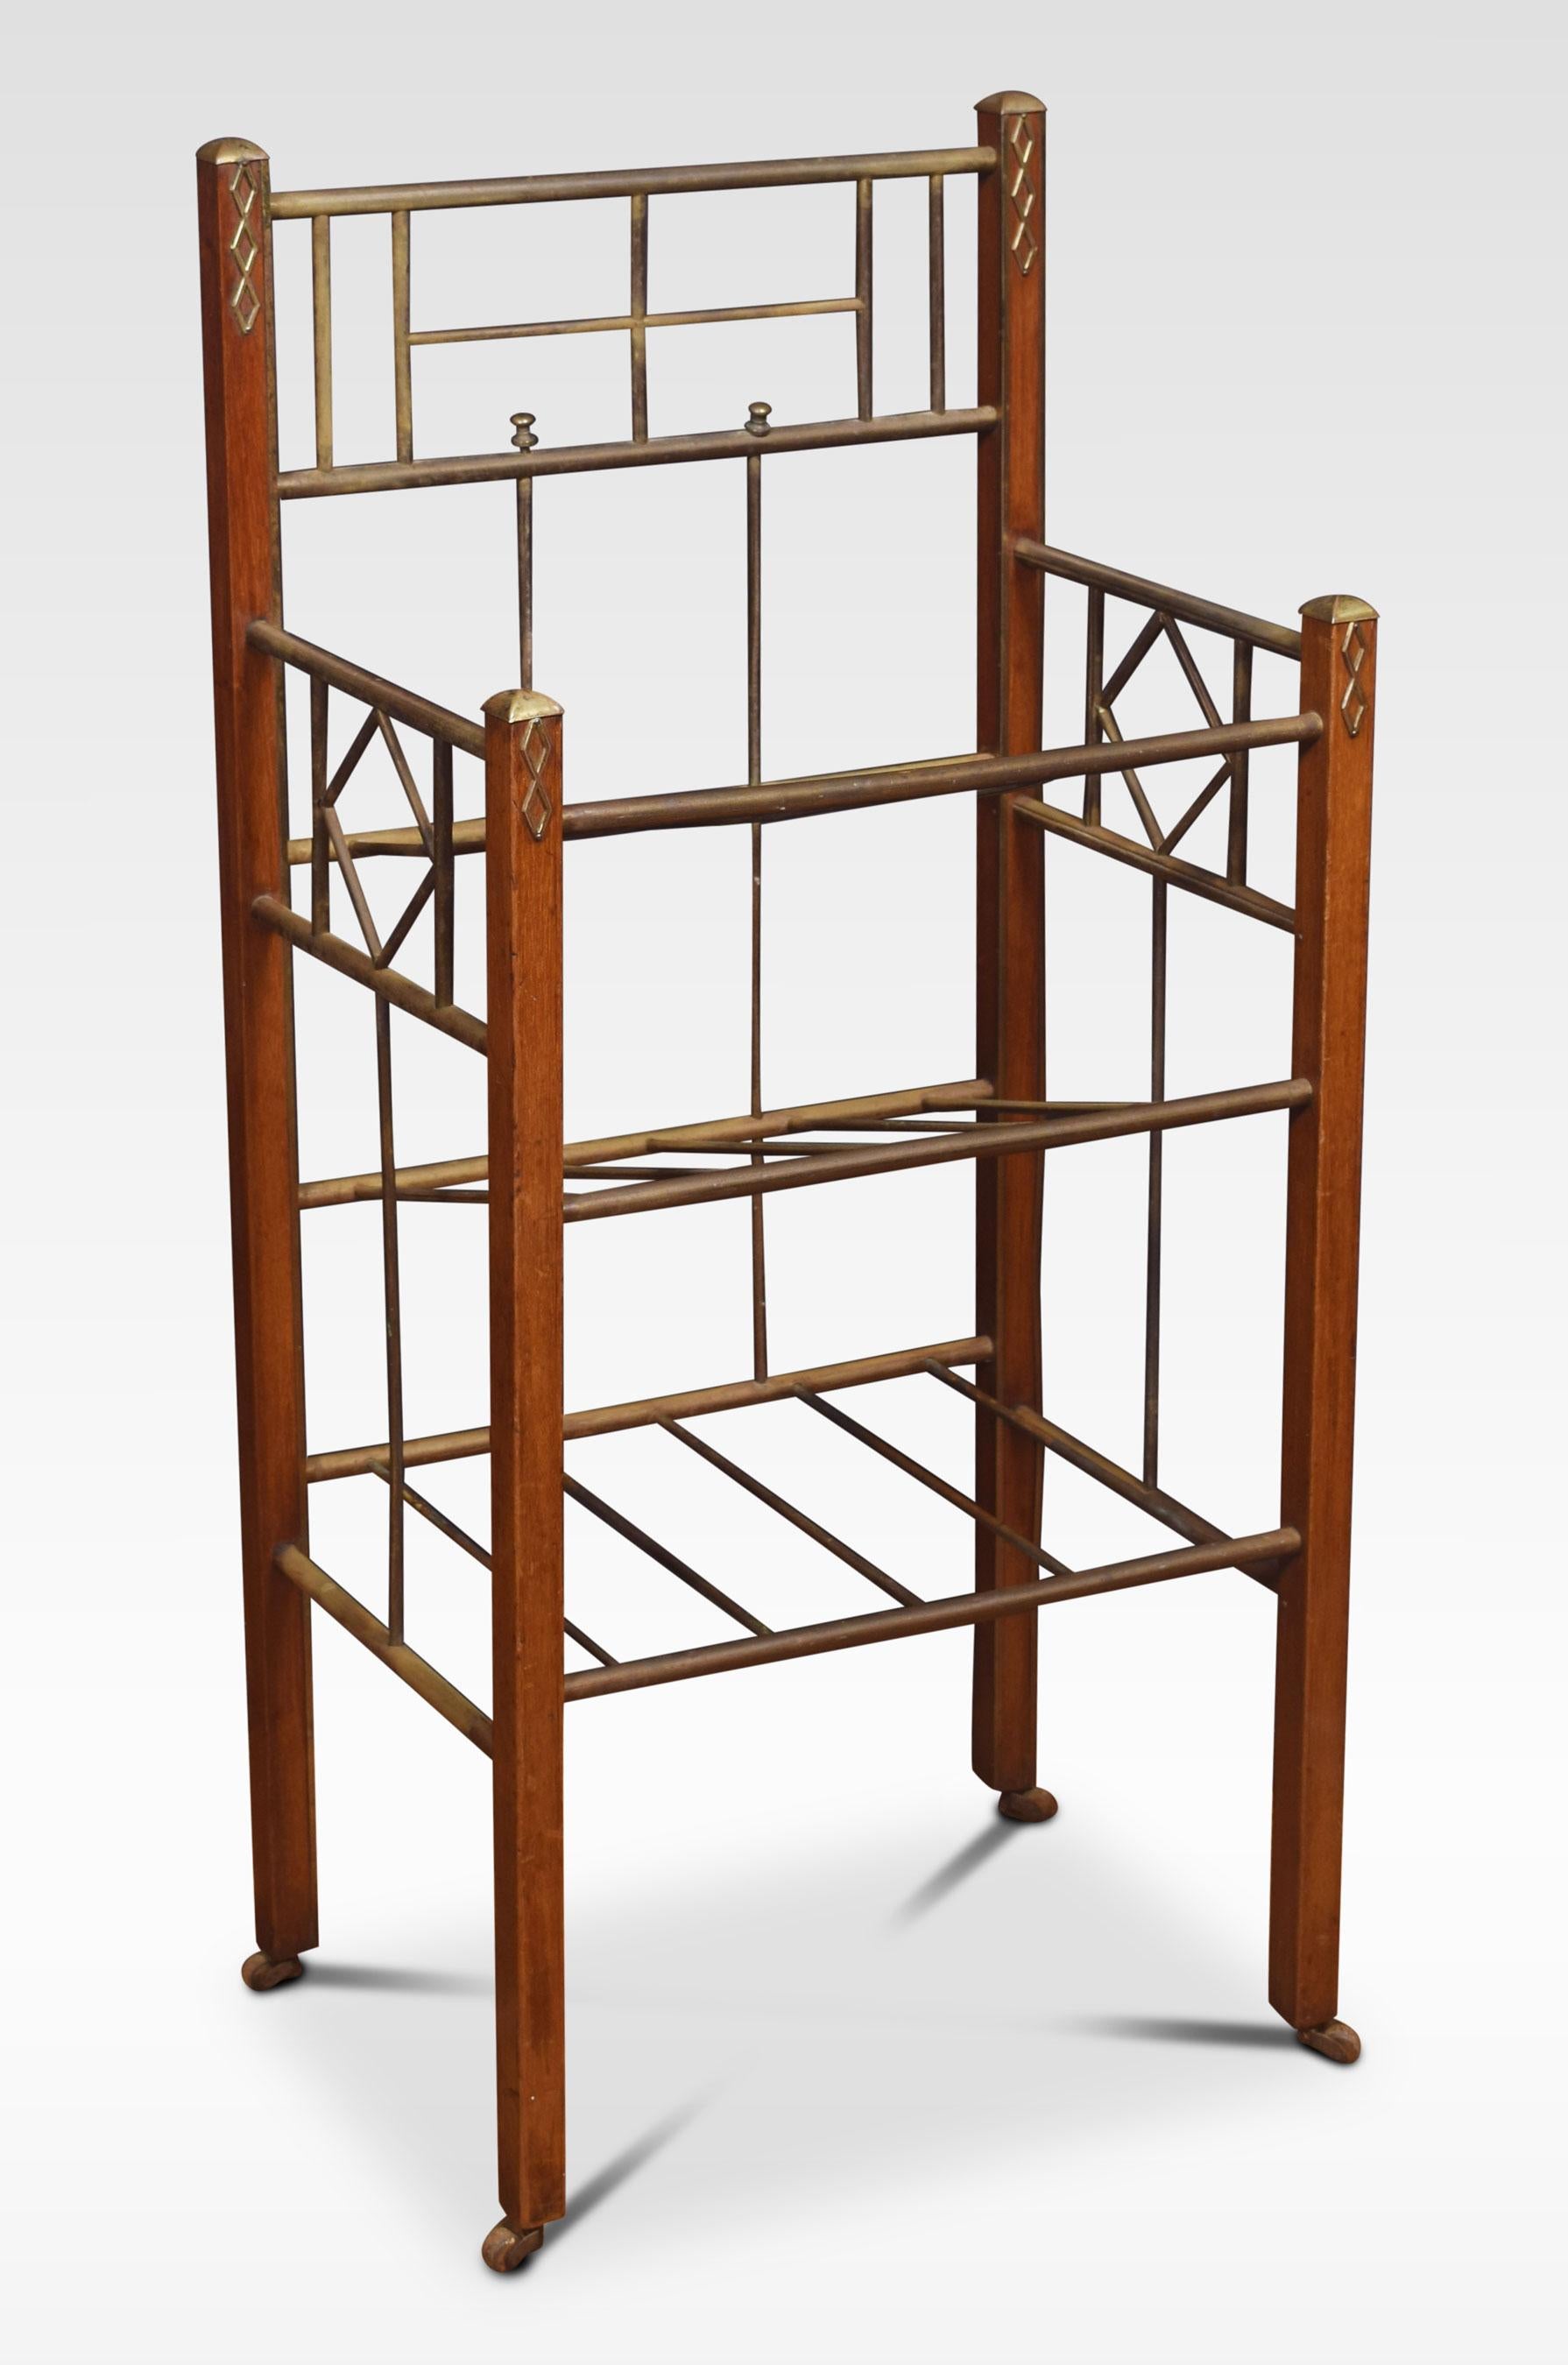 An early 20th-century newspaper stand. The mahogany frame fitted with tubular brass three-tier supports terminating in brass casters.
Dimensions
Height 36.5 Inches
Length 18 Inches
width 12 Inches